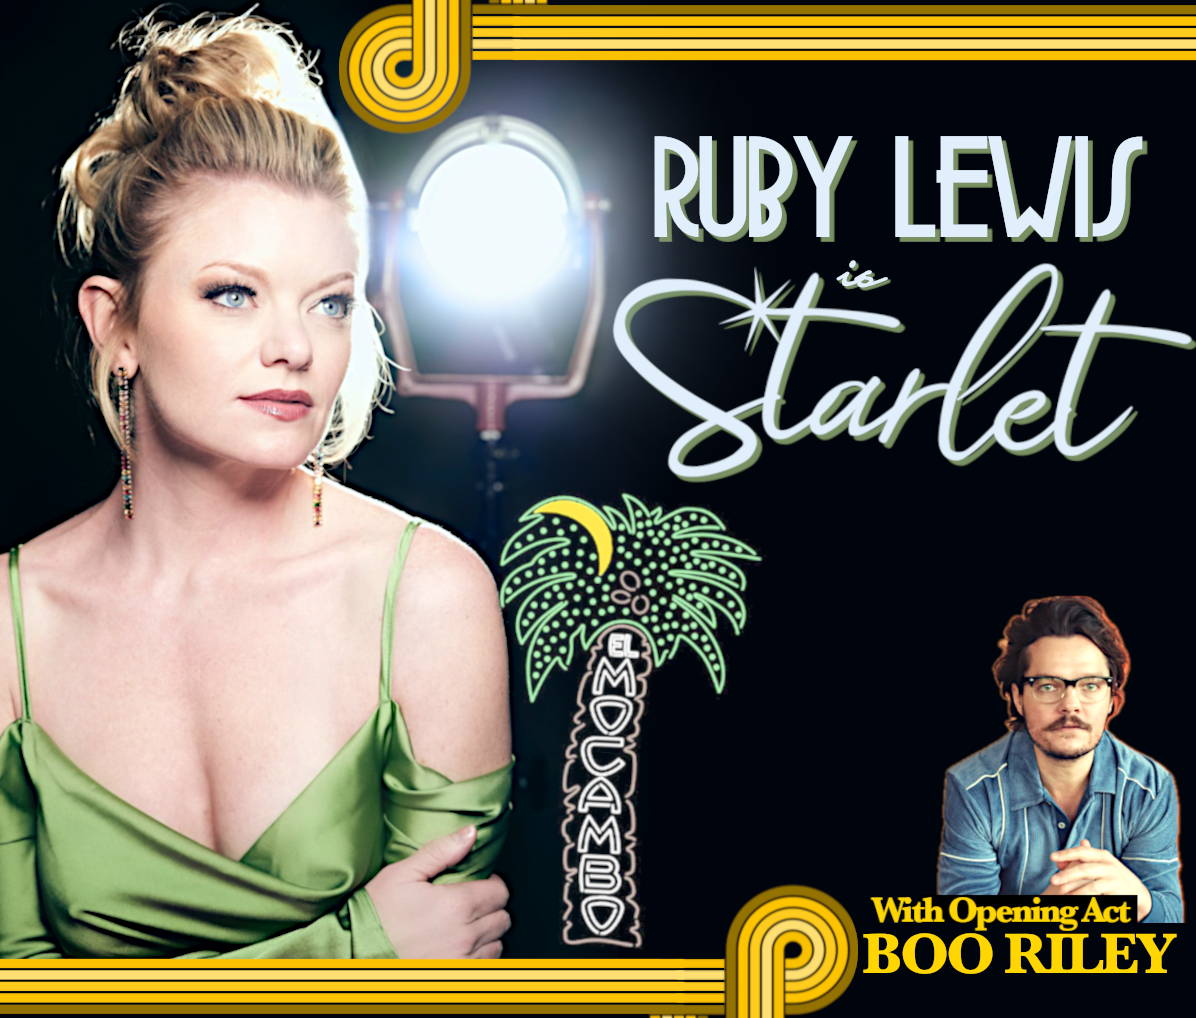 Ruby Lewis is Starlet with Preshow Featuring Boo Riley